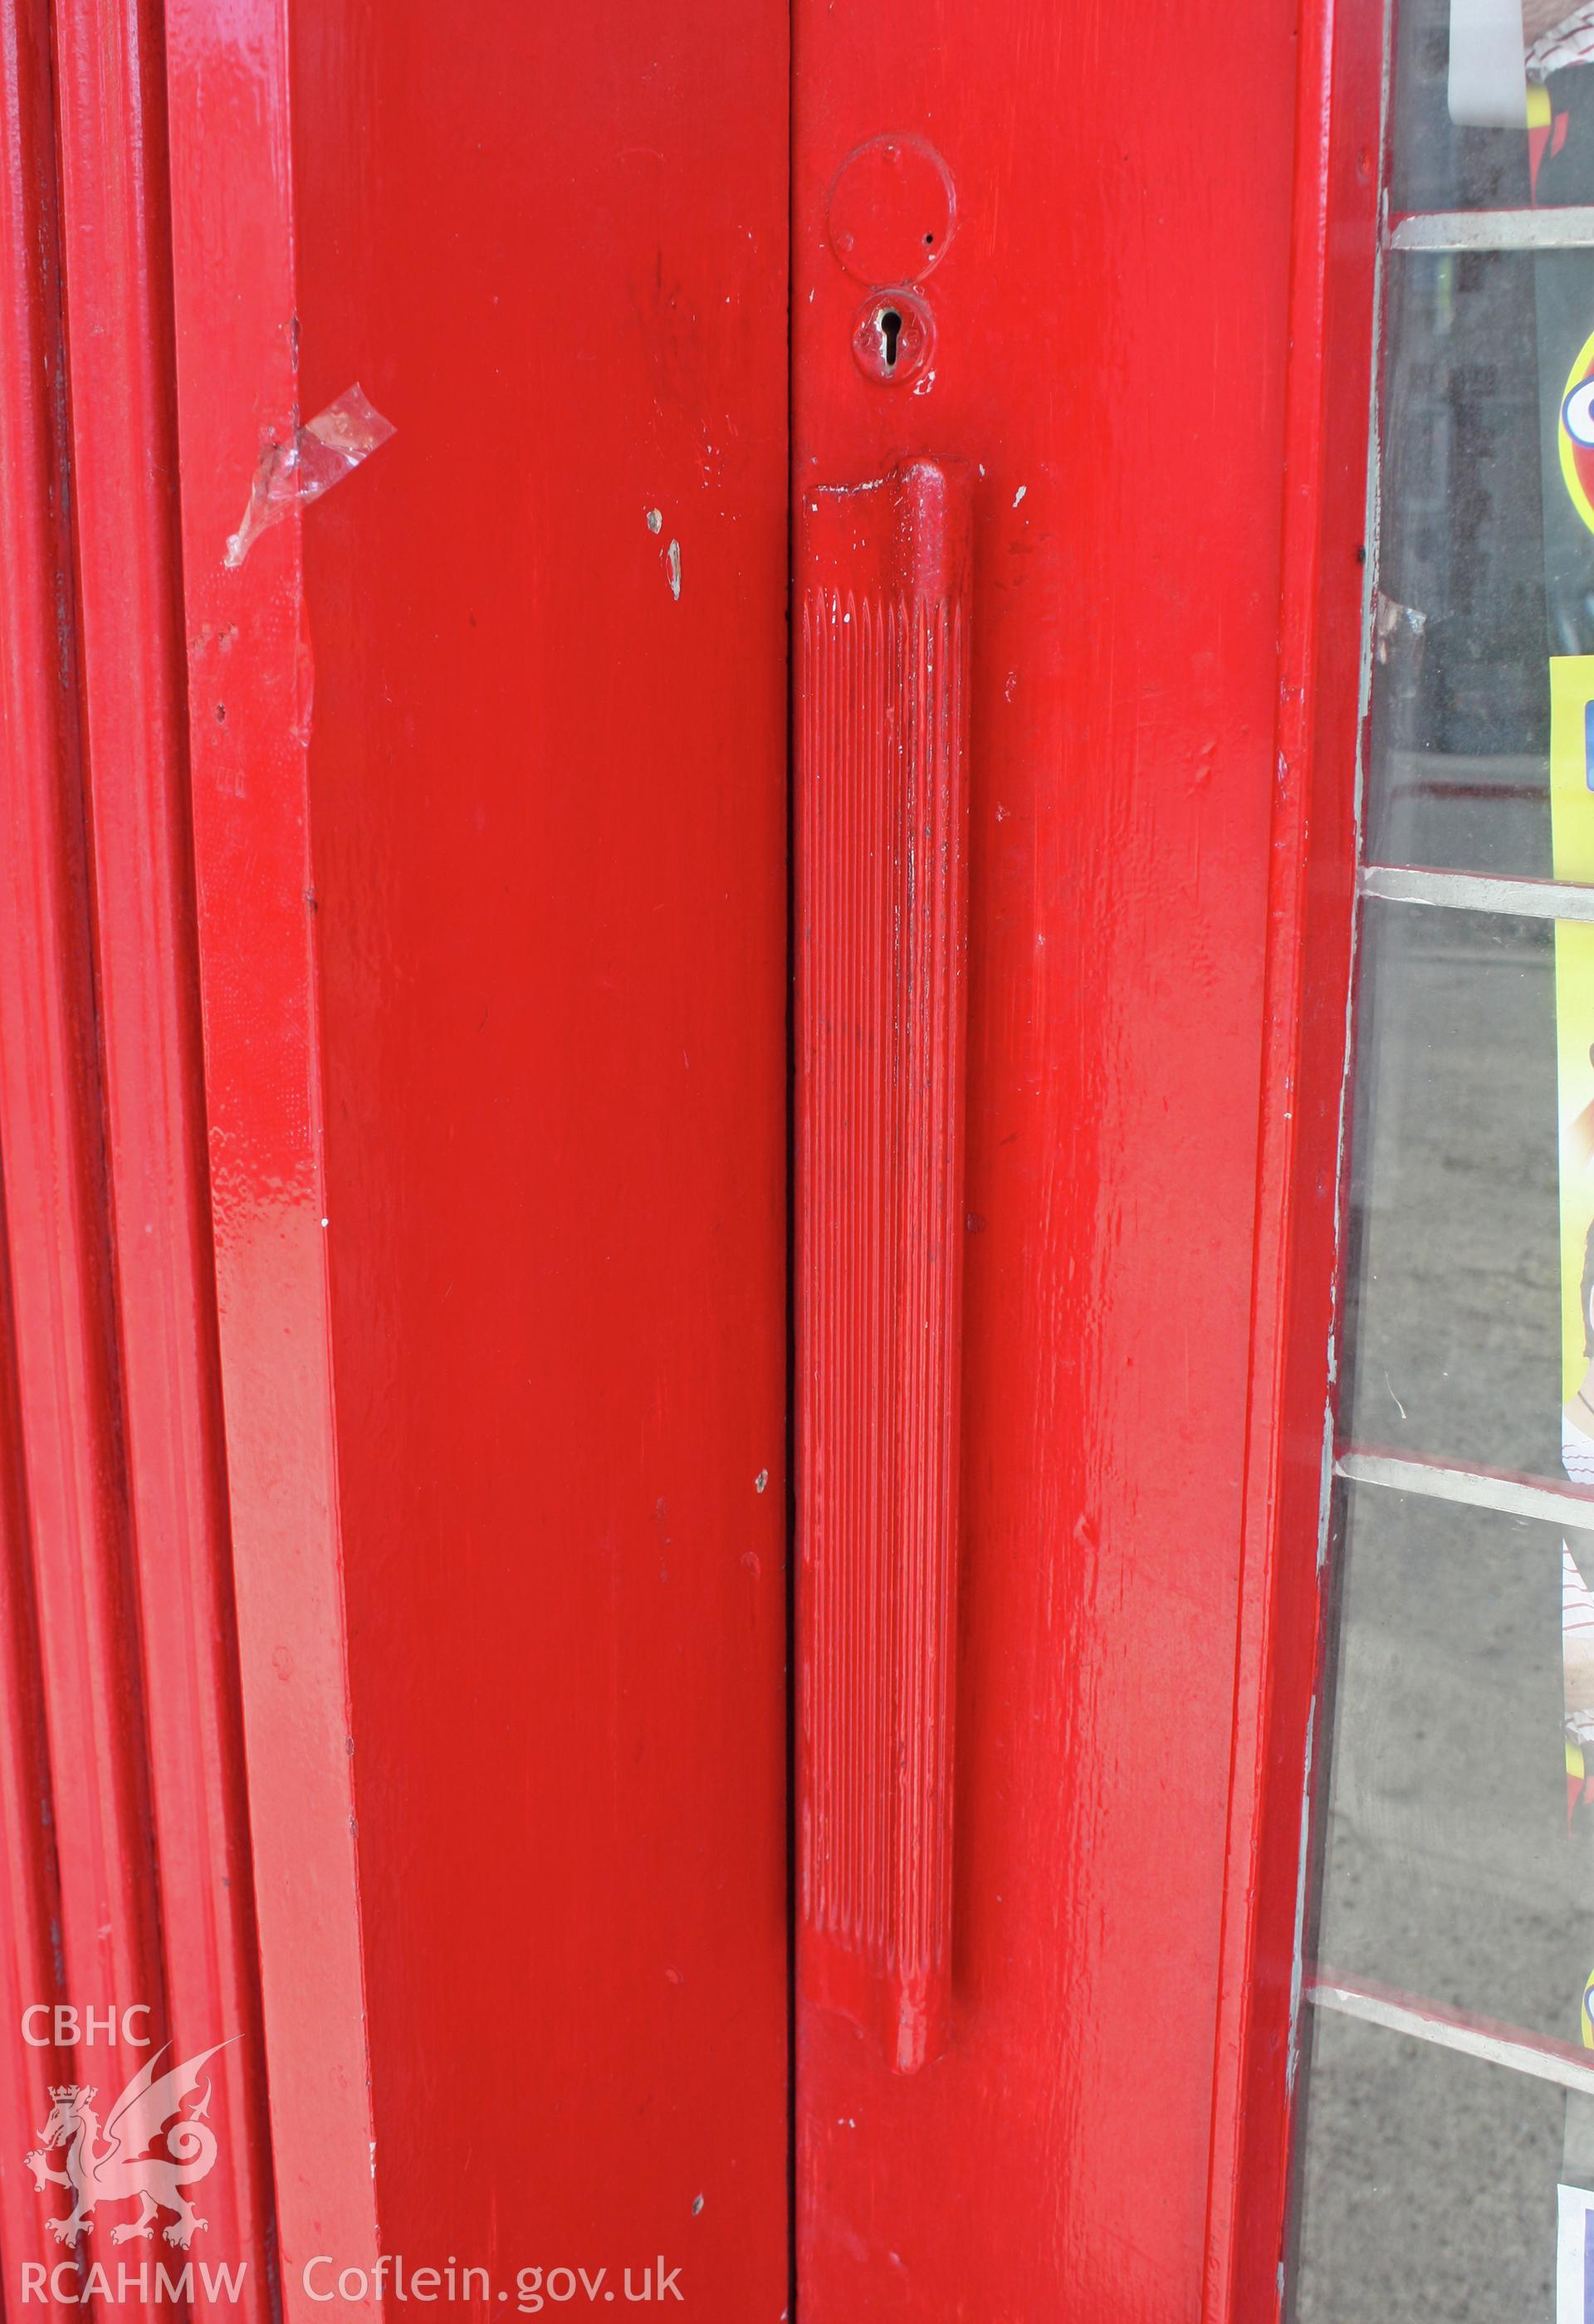 Colour photograph showing detail of the handle on the entrance door to the petrol station on Rhyl Road, Denbigh. Photographic survey conducted by Sue Fielding on 26th August 2011.